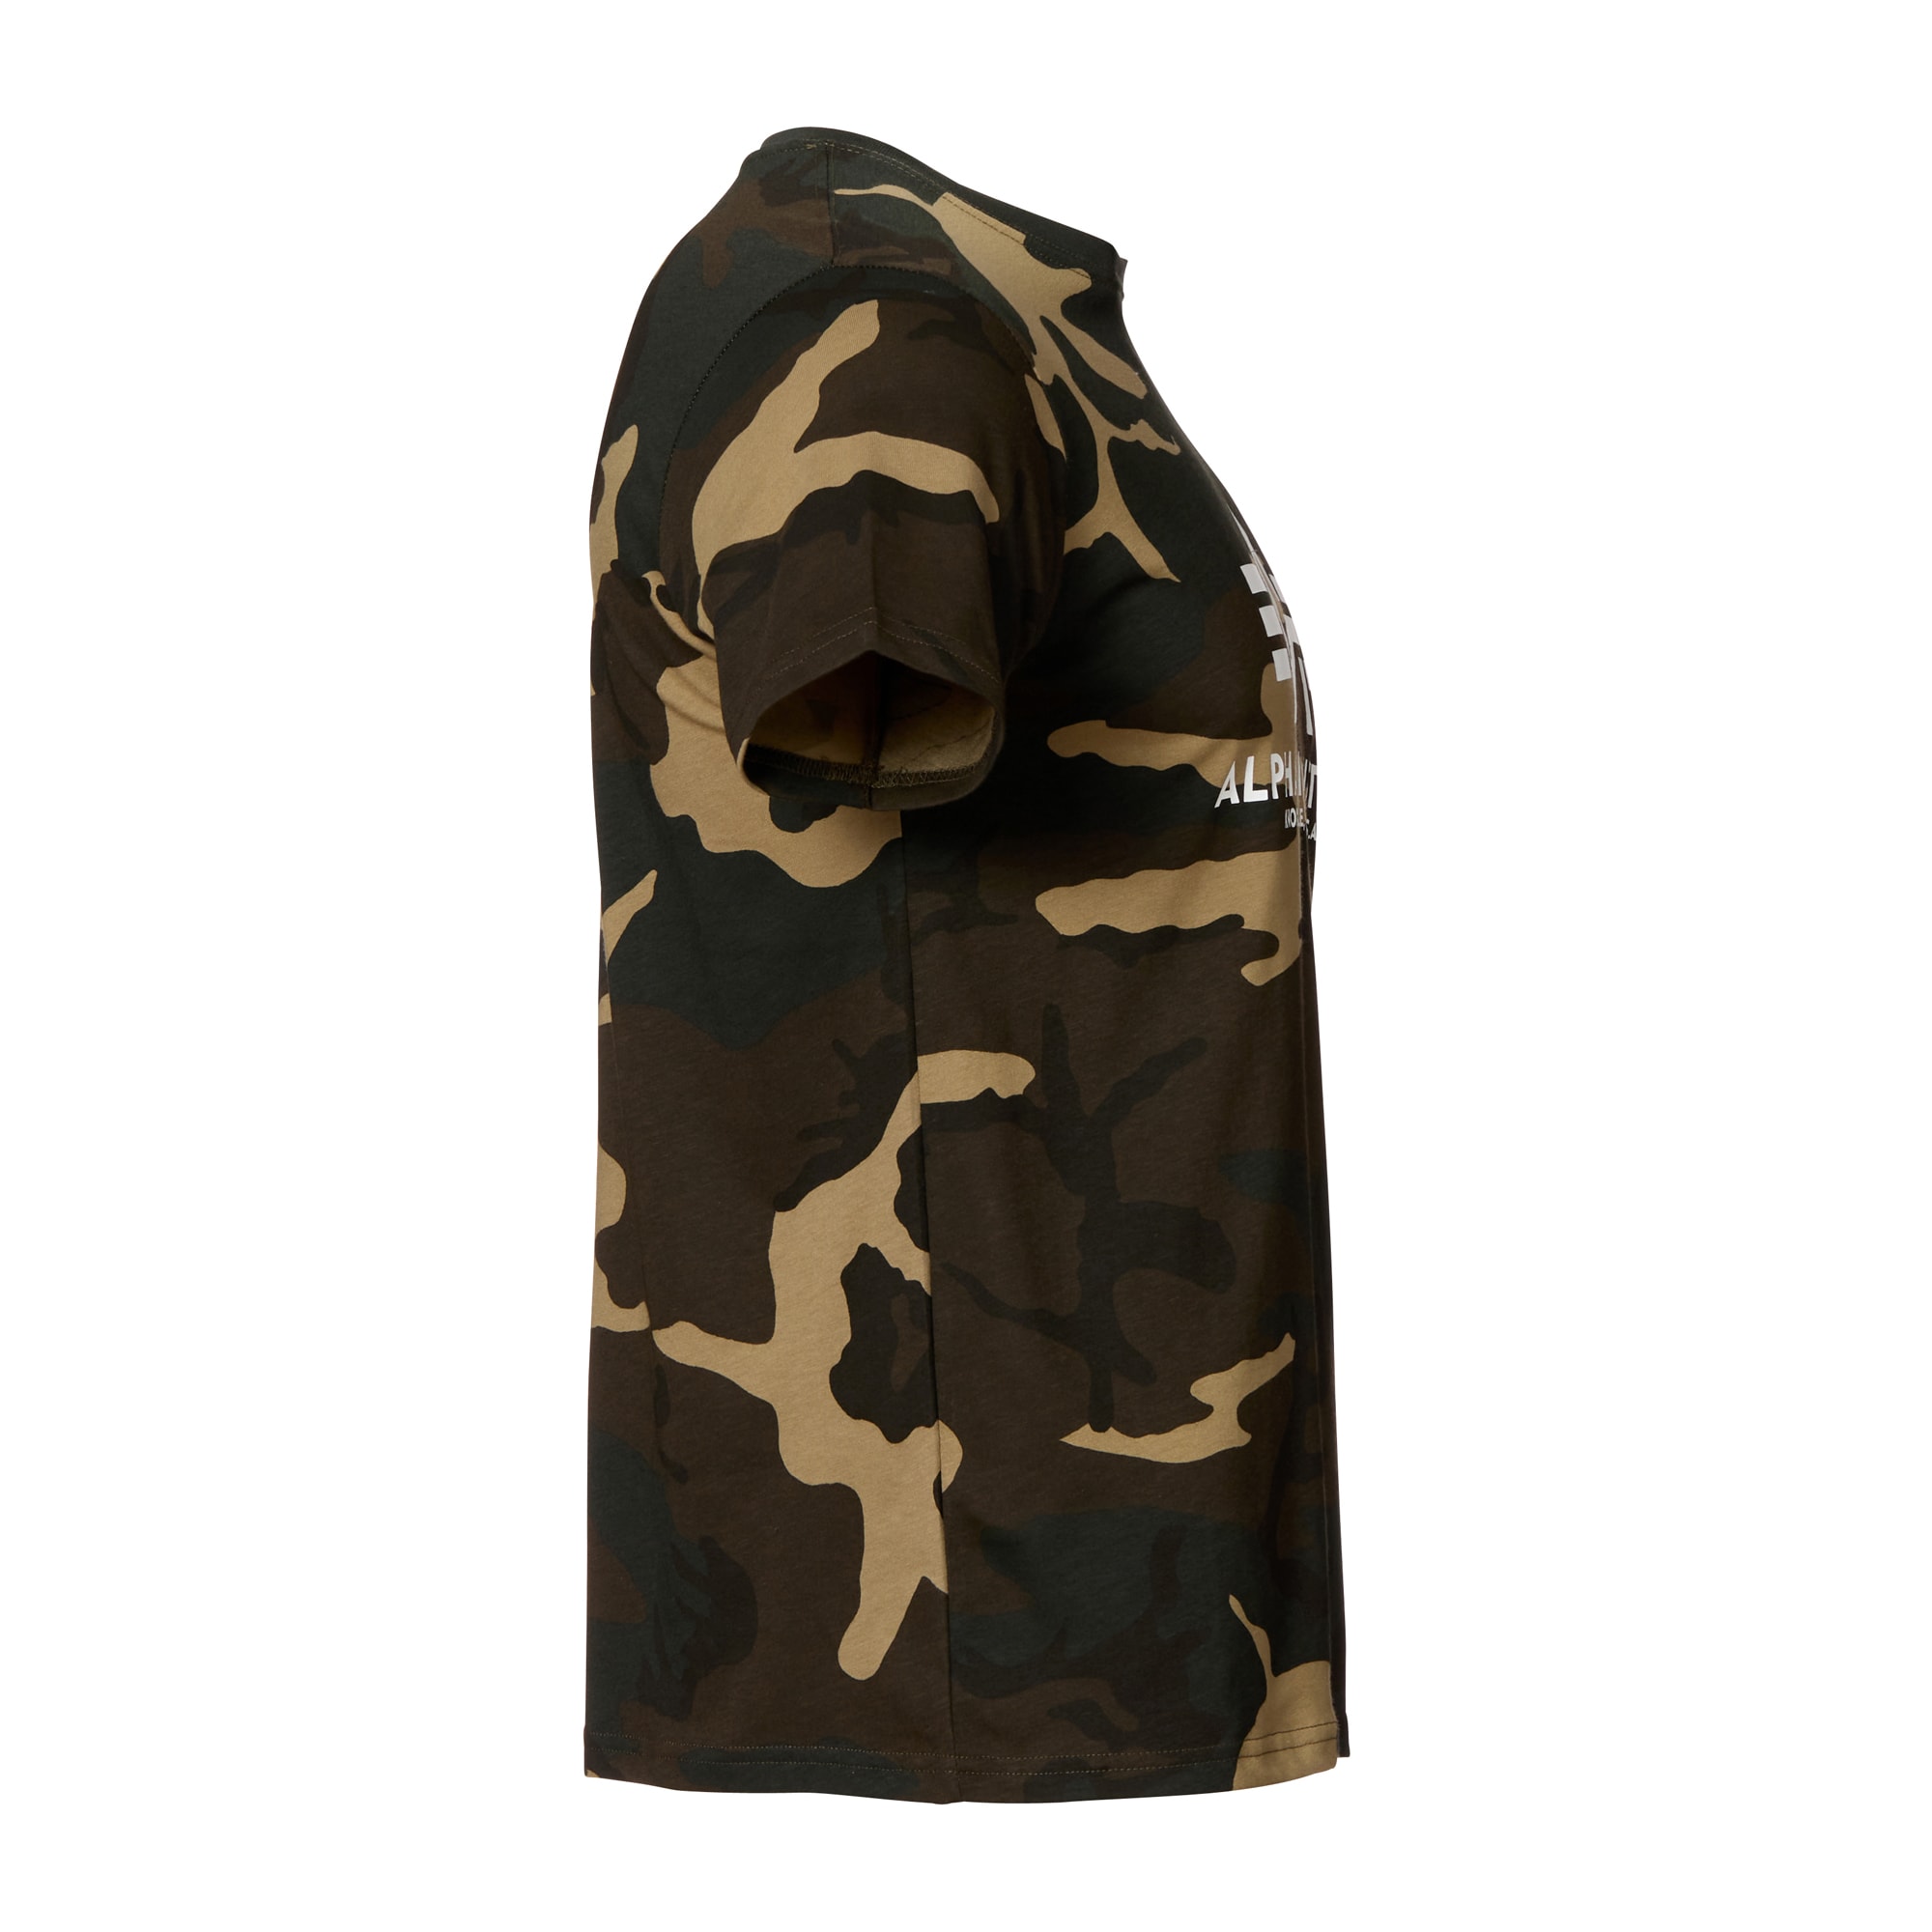 Purchase the Alpha 65 T-Shirt by Industries Basic camo woodland